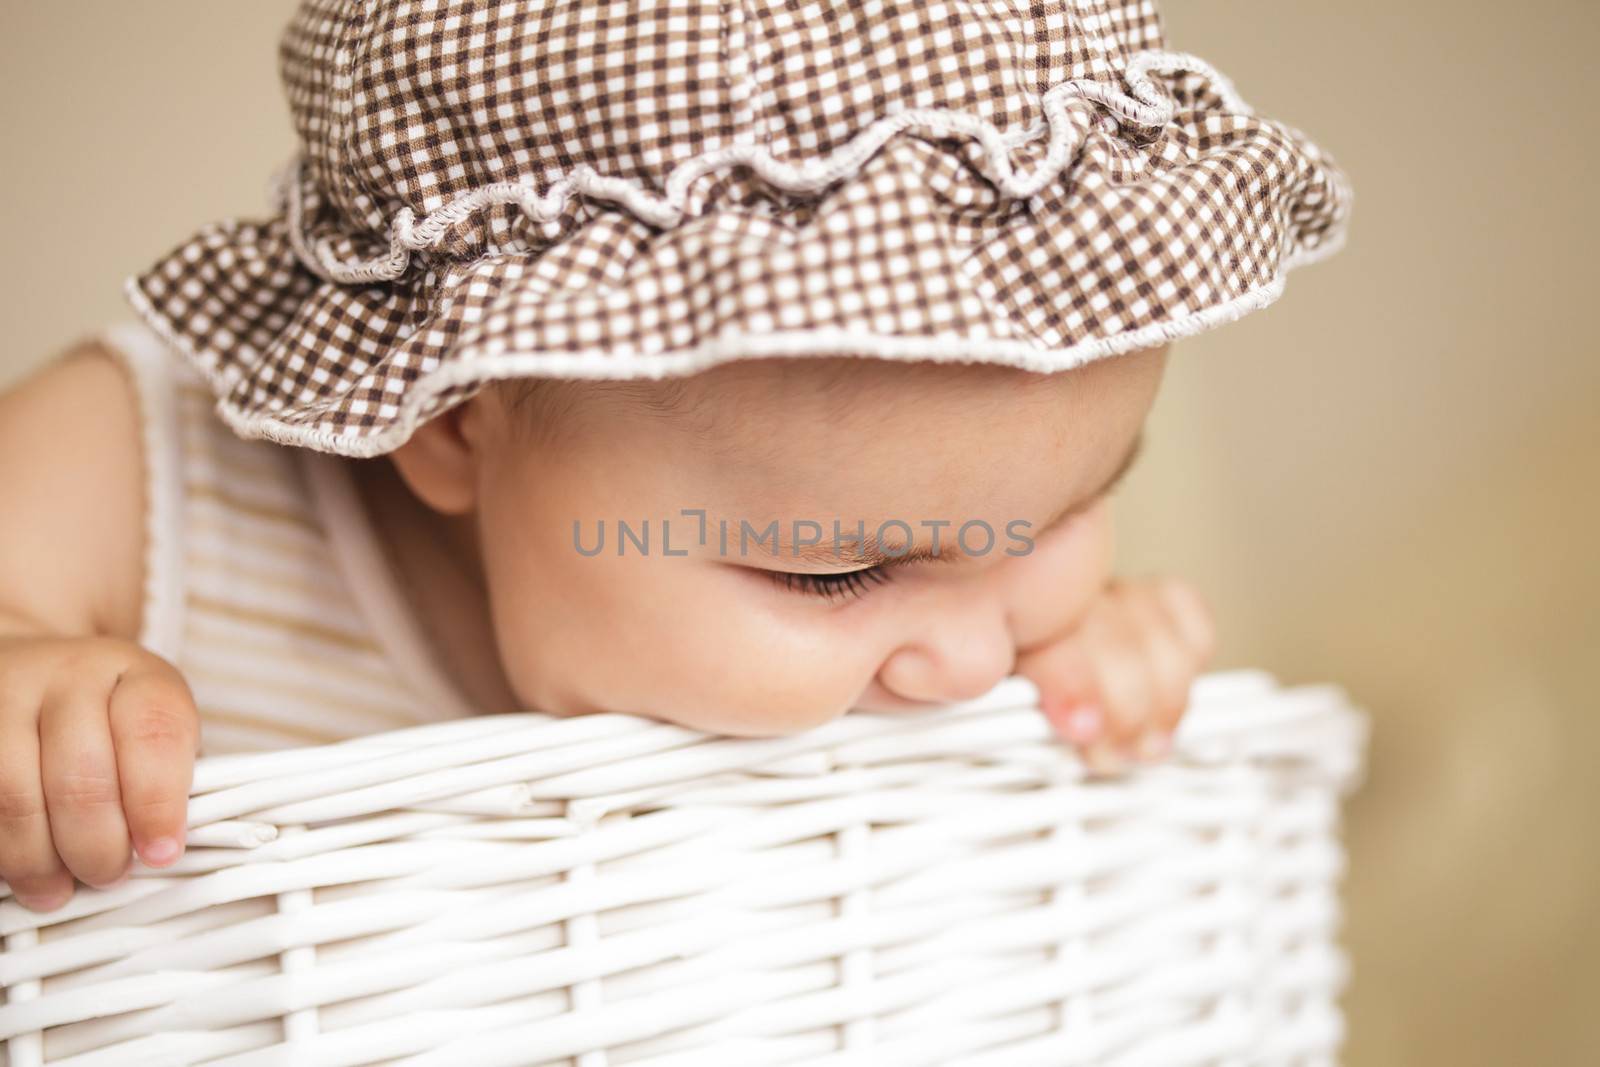 Eight month baby in basket by oksix